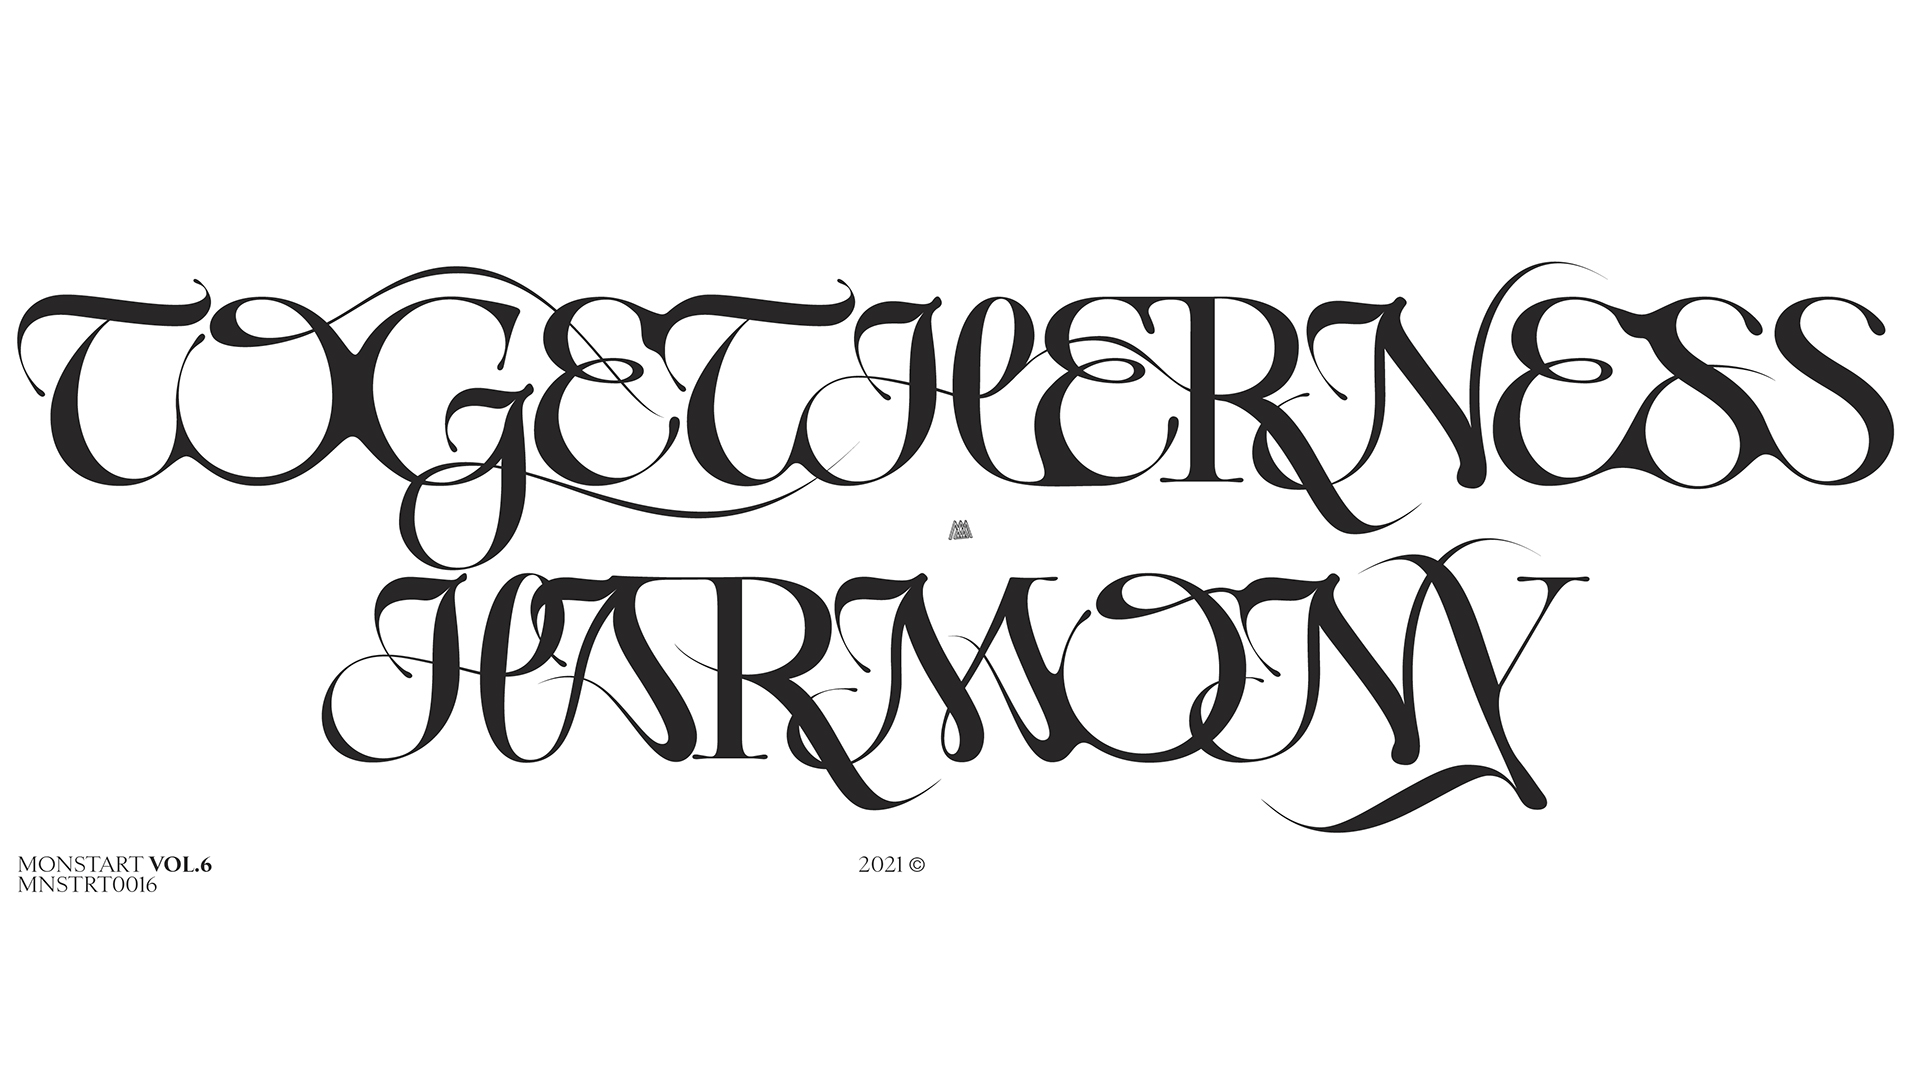 Togetherness Harmony written in a typography with ligatures and contrast by Floriane Rousselot